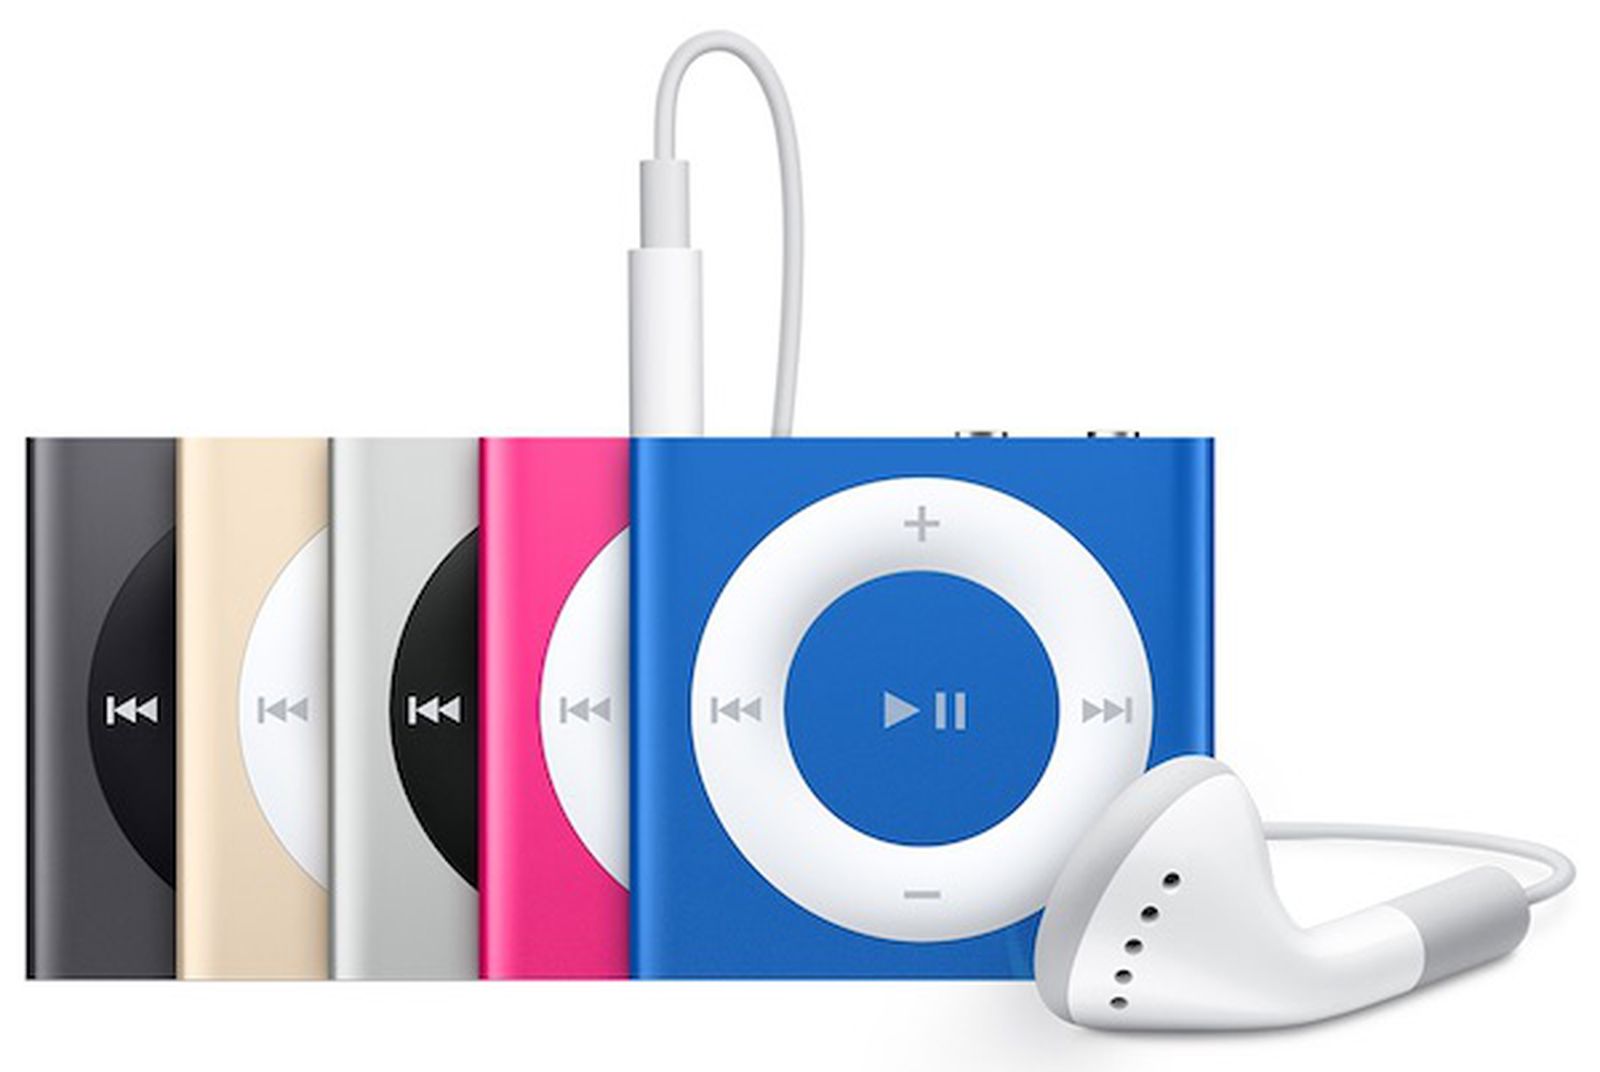 Guide to Play Spotify on iPod shuffle in 2021